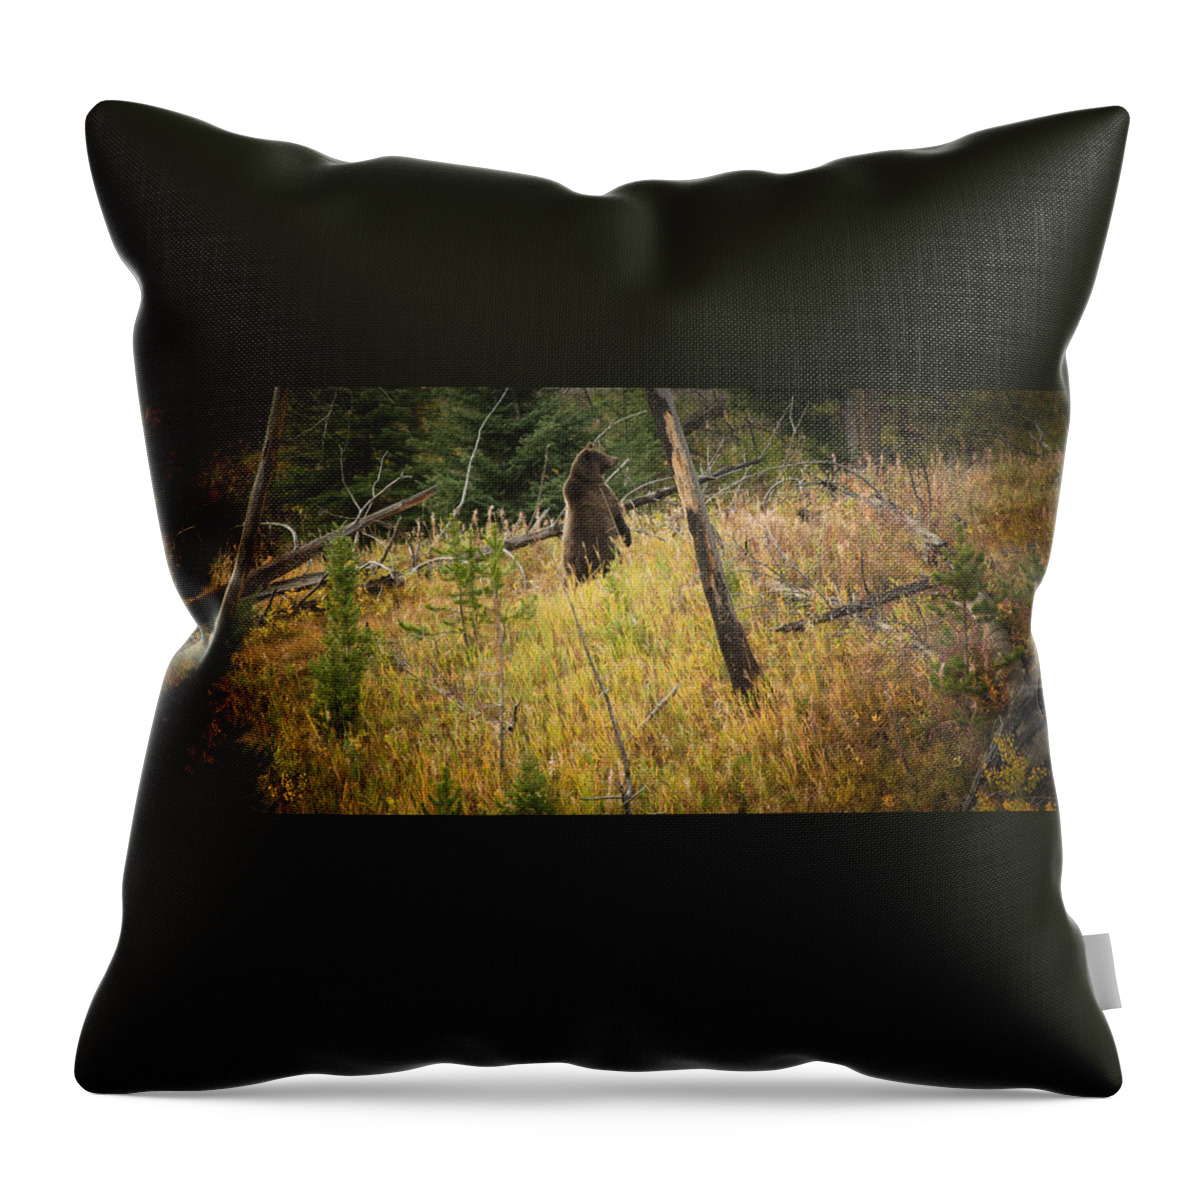 Bears Throw Pillow featuring the photograph Grizzly Bear by Roger Mullenhour